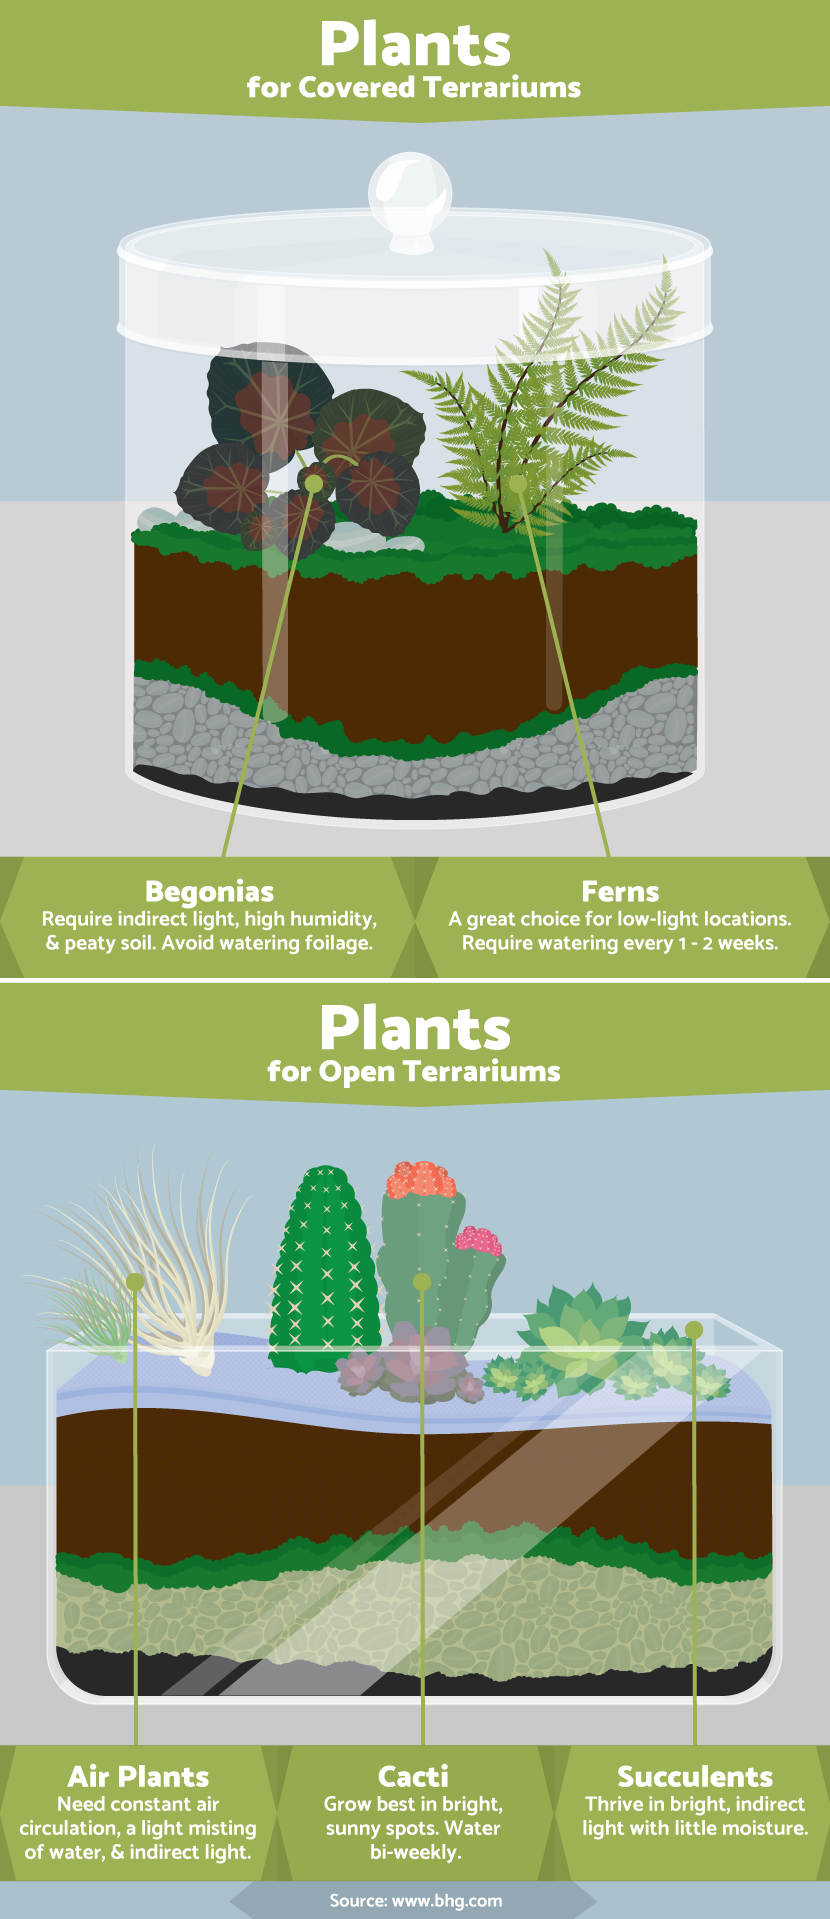 Terrarium Soil Layers And Their Functions (With Pictures) - Smart Garden  Guide